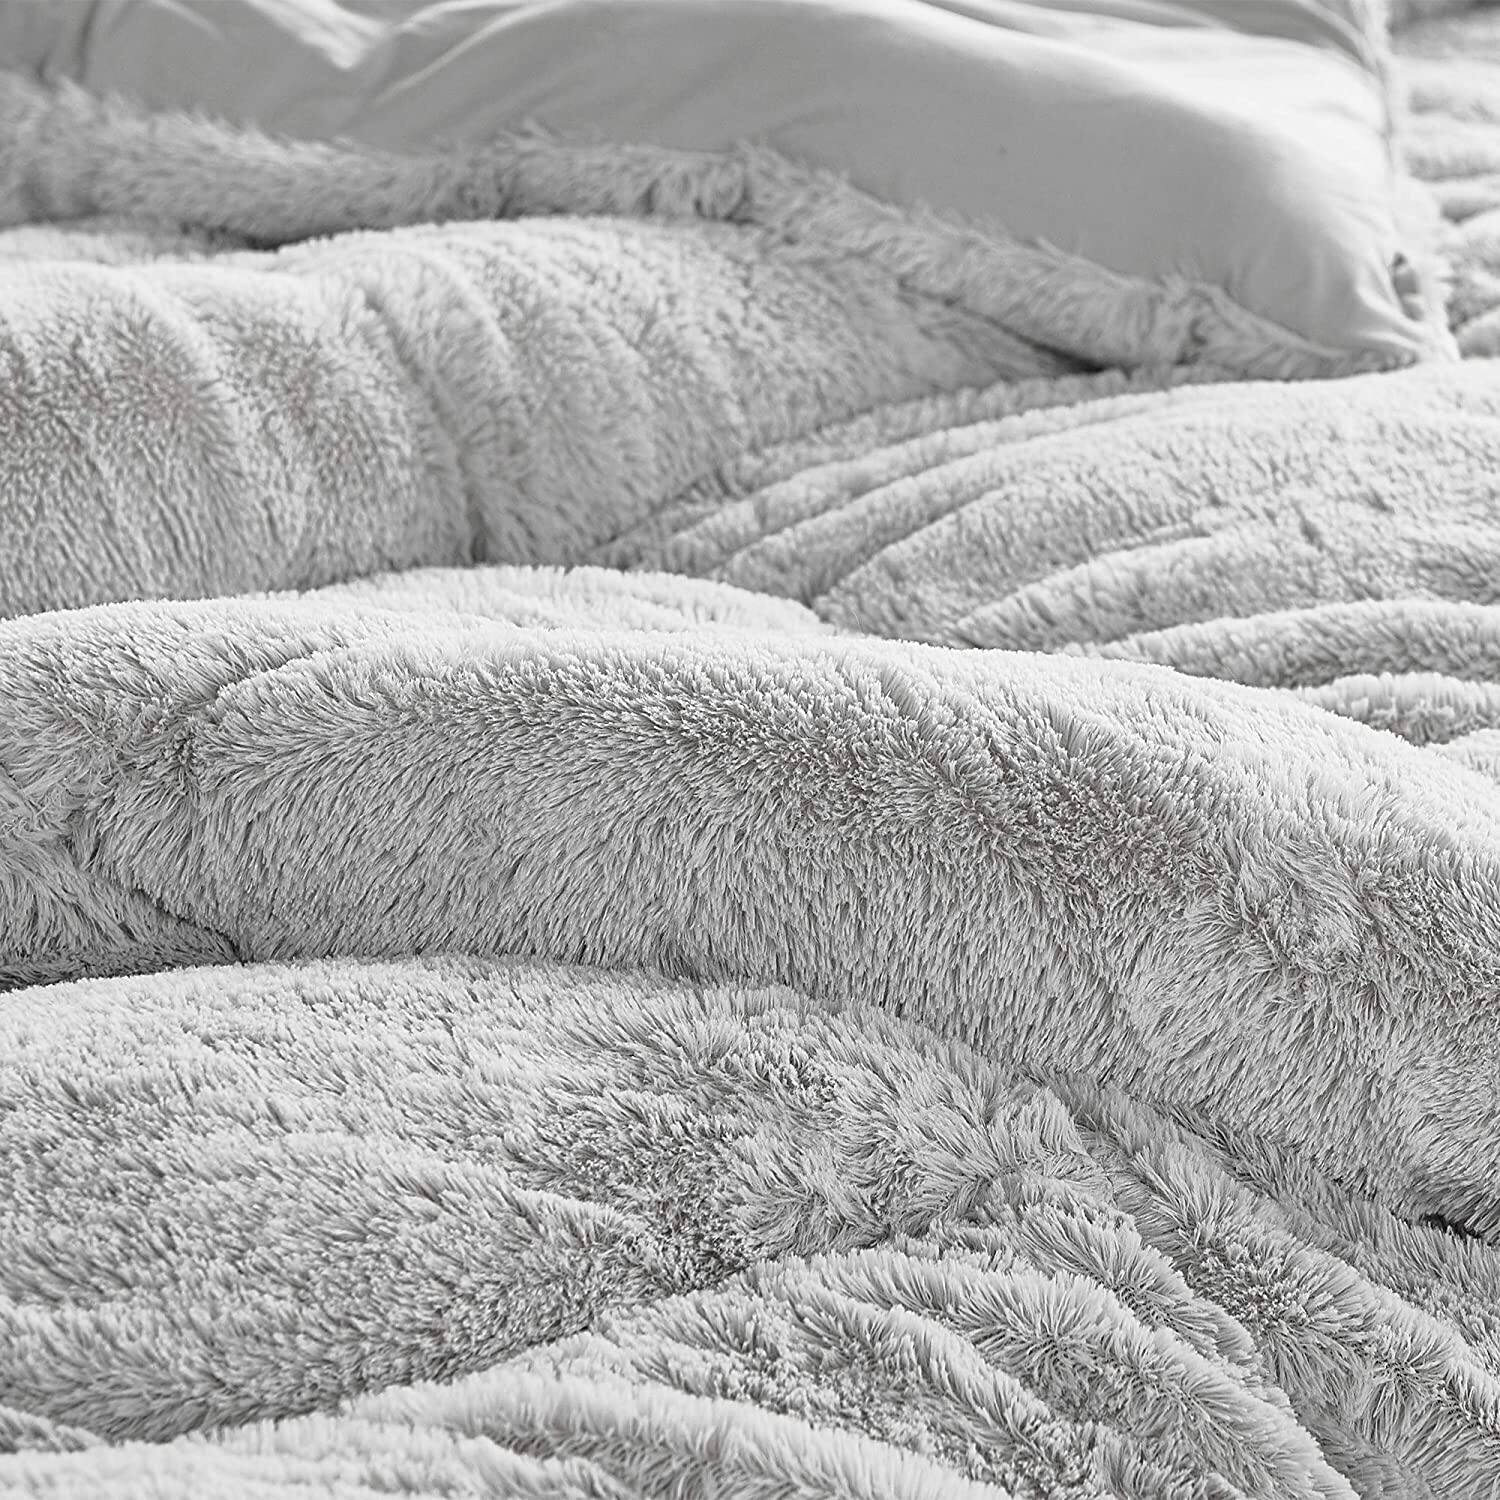 Are You Kidding Bare - Coma Inducer® Oversized Comforter - Antarctica ...